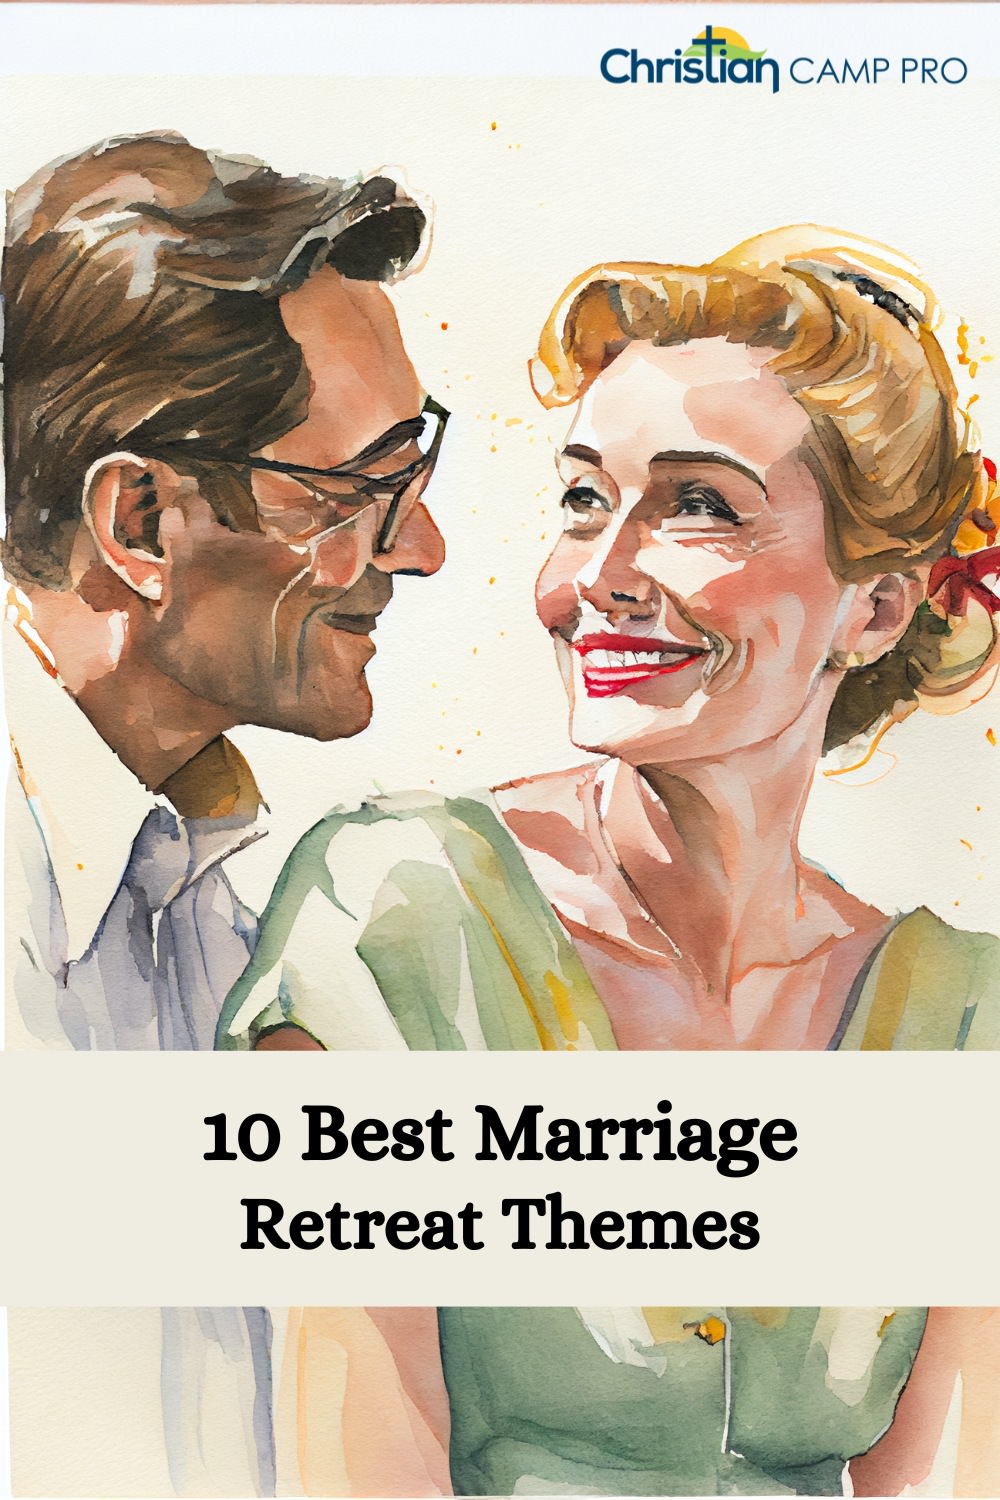 The 10 Best Themes for Christian Marriage Retreats